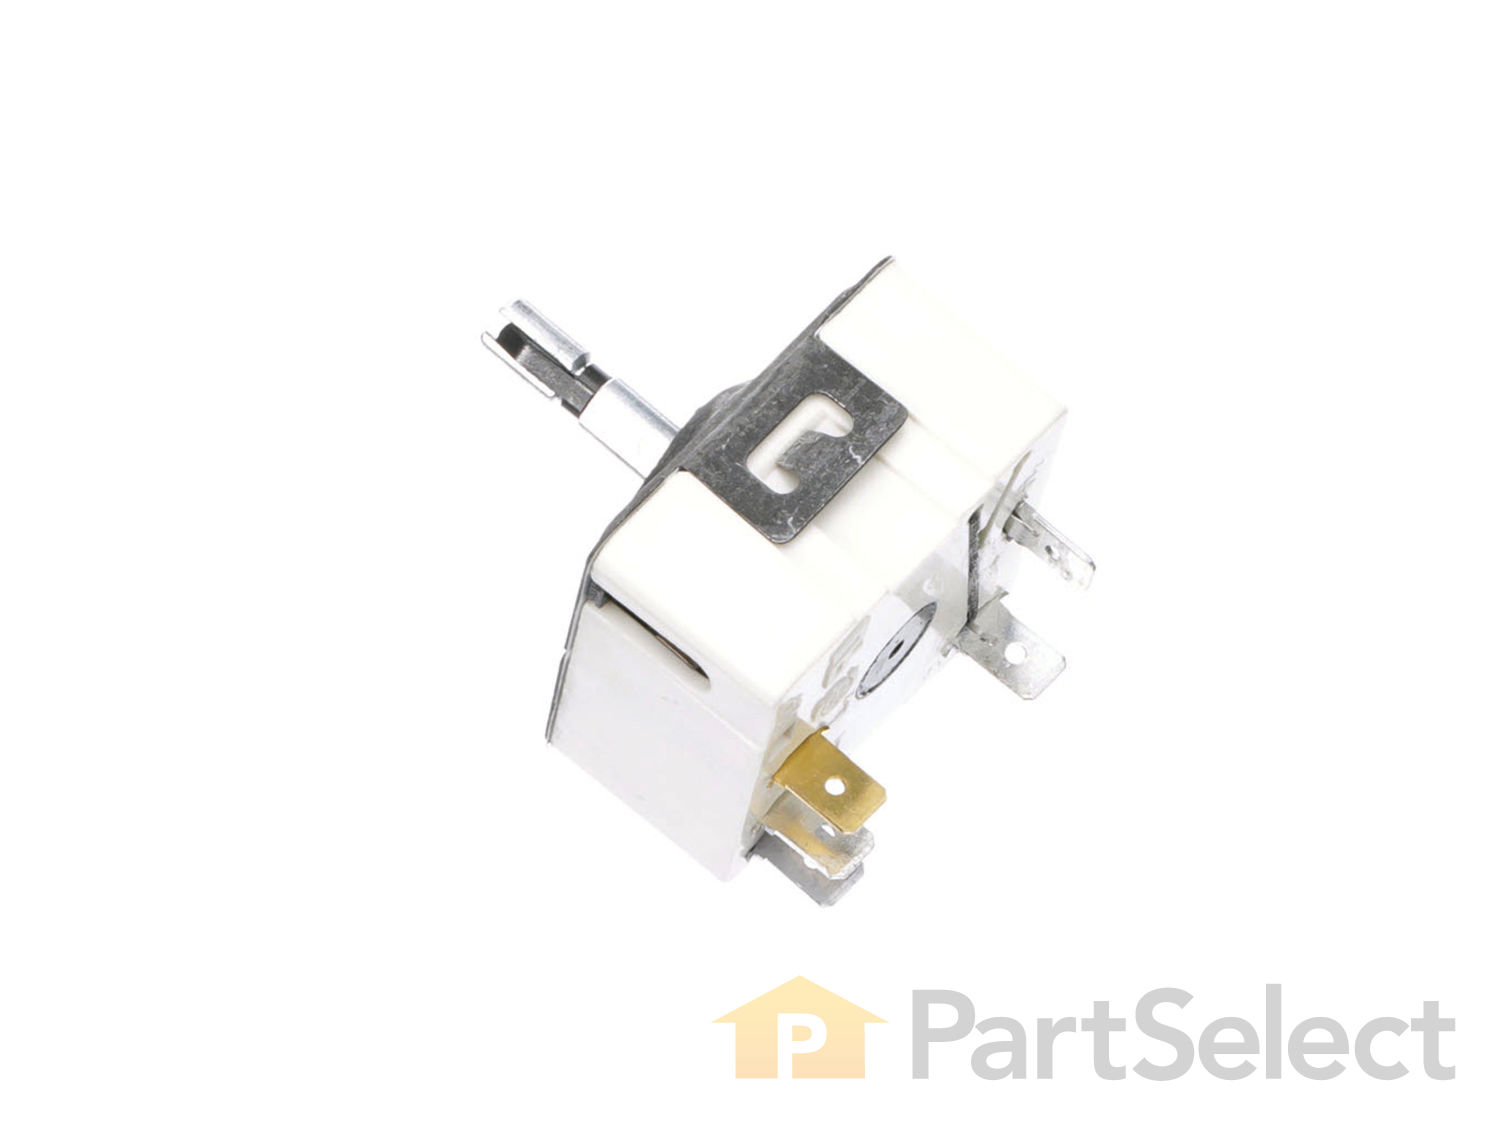 Surface Burner Switch - 240V W11120791 | Official Whirlpool Part | Fast  Shipping | PartSelect  W11120791 Wiring Diagram    PartSelect